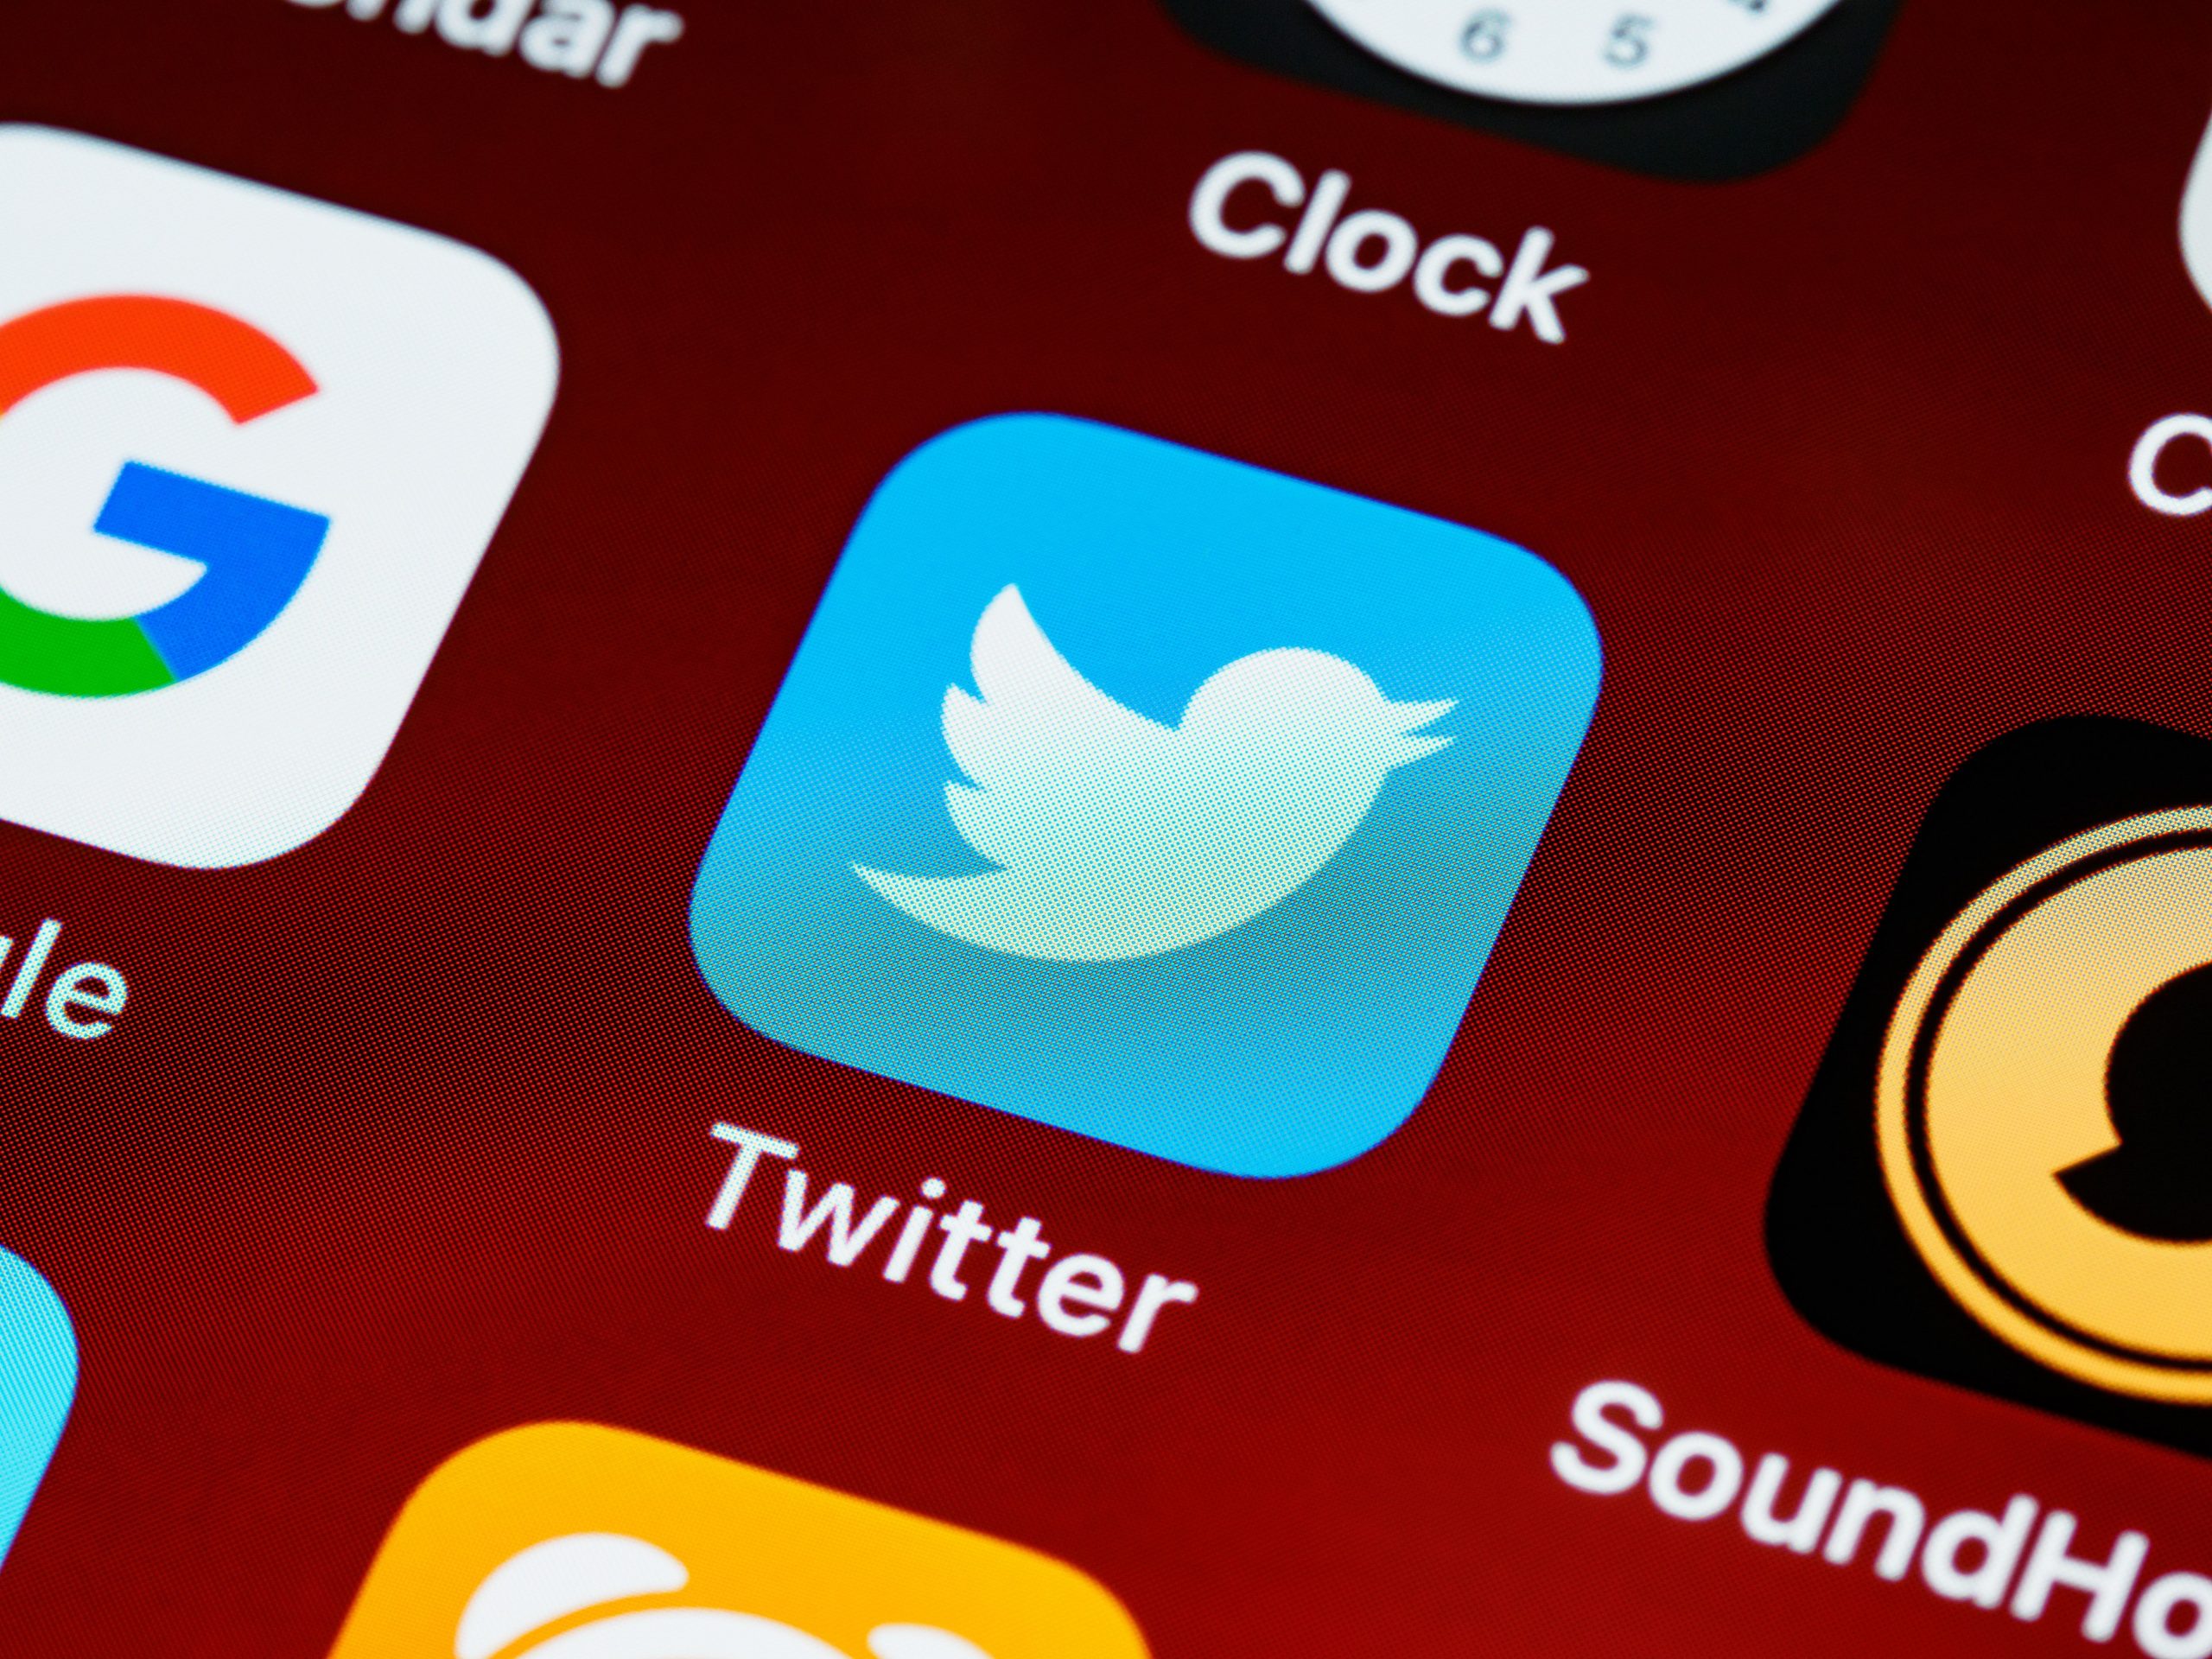 Twitter not following Centre’s IT rules, others have complied: Report